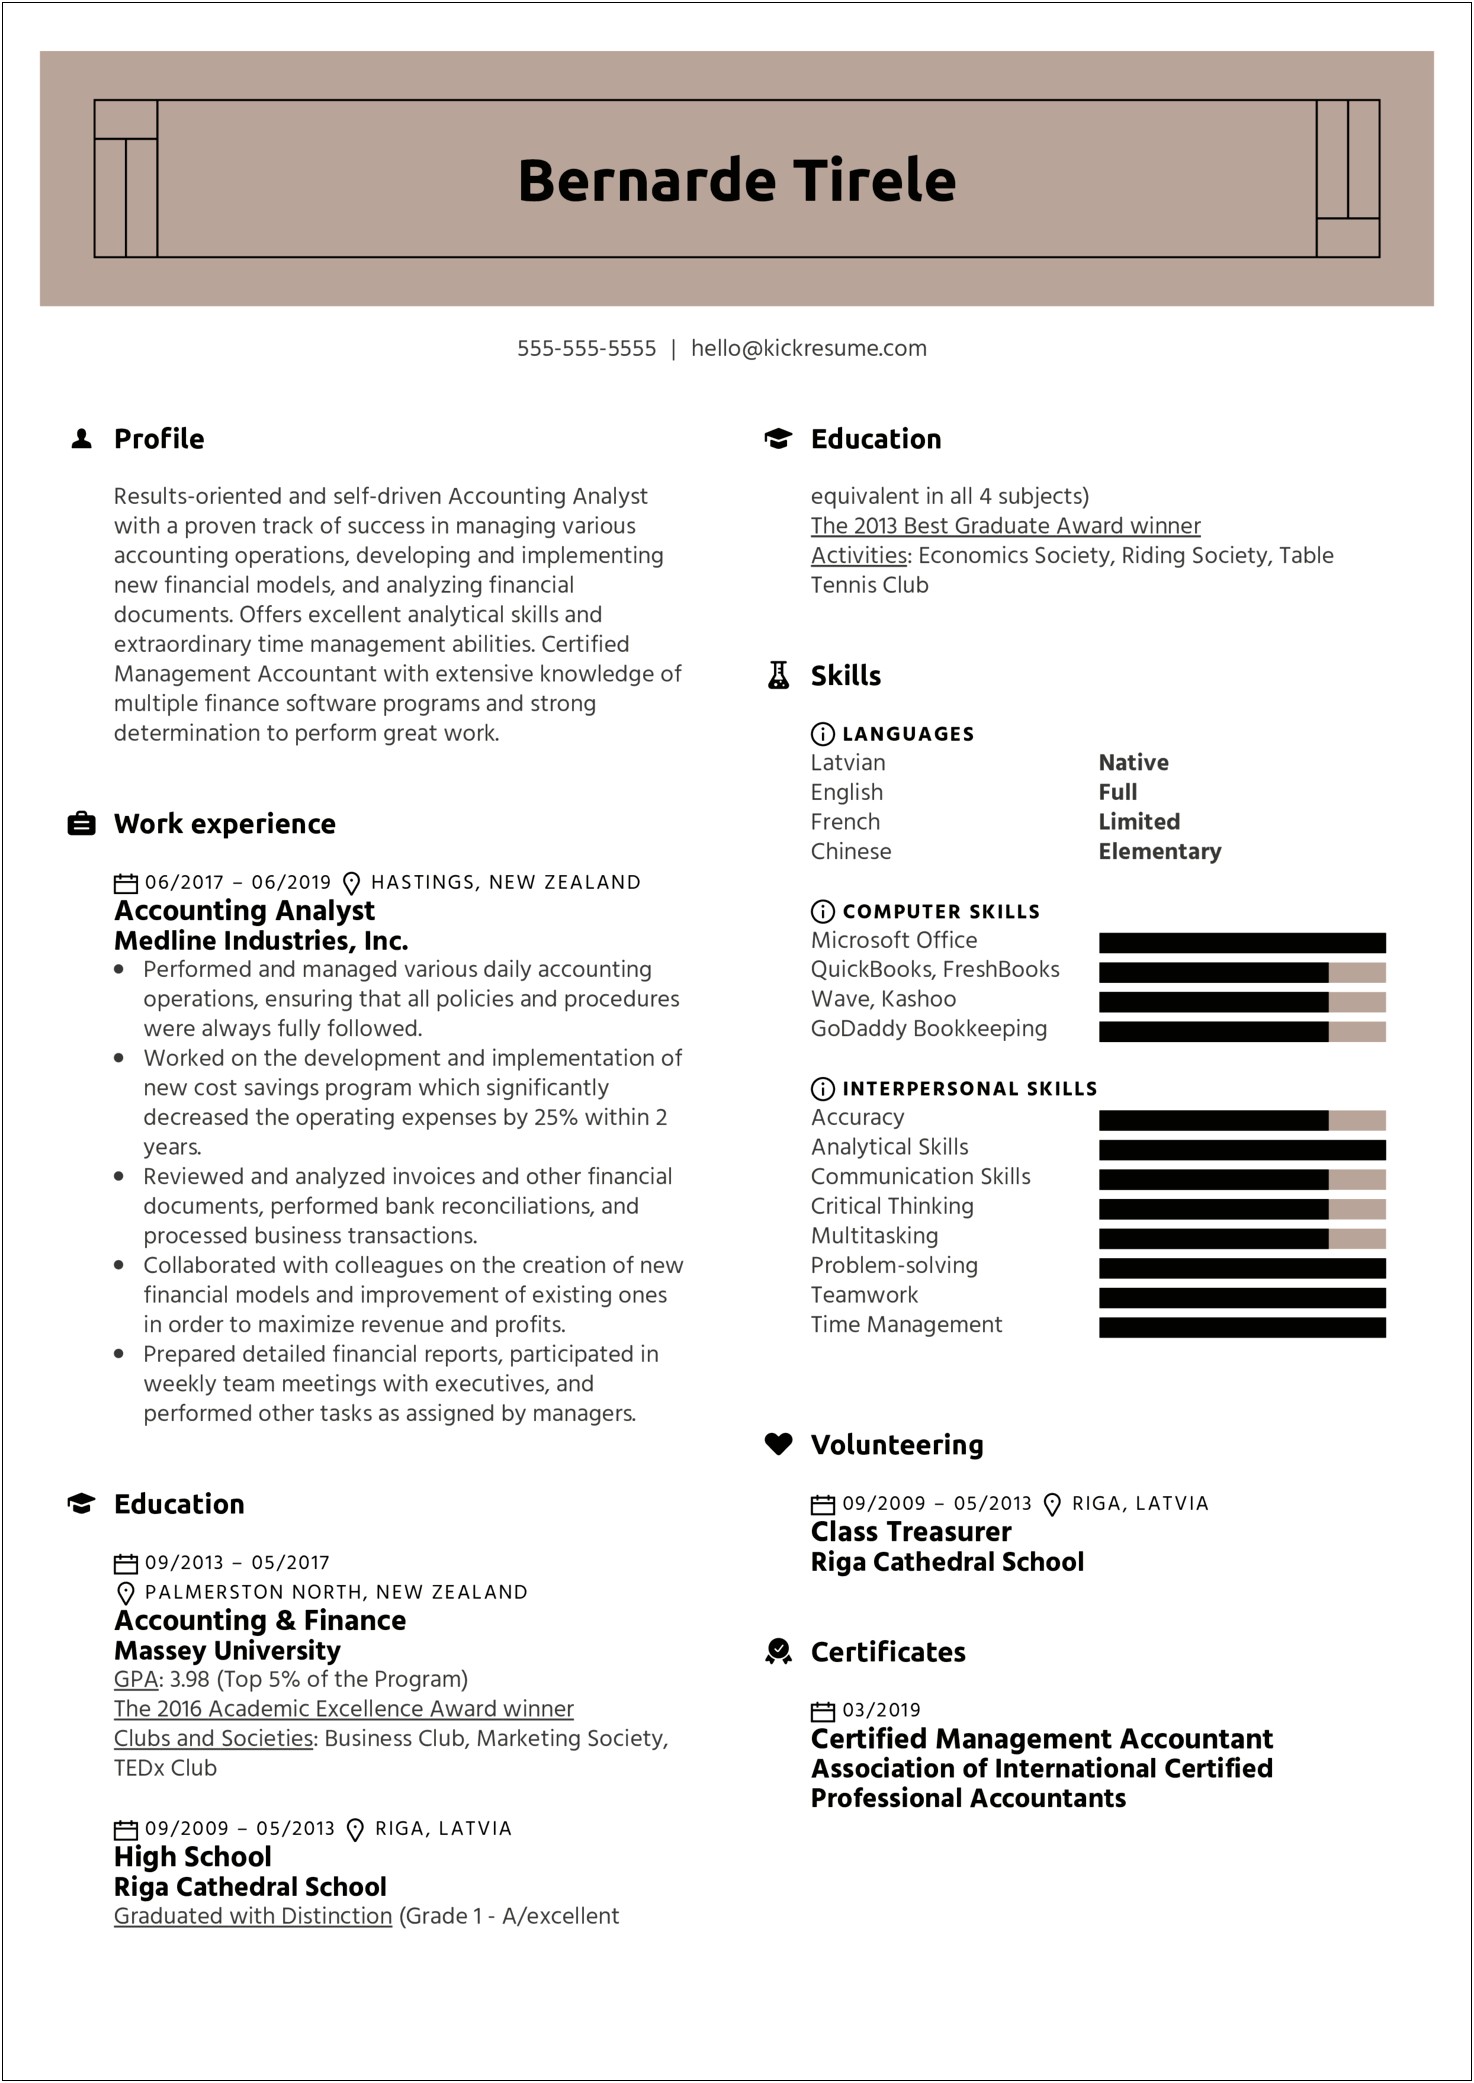 Sample Of Resume Objective For Accountant